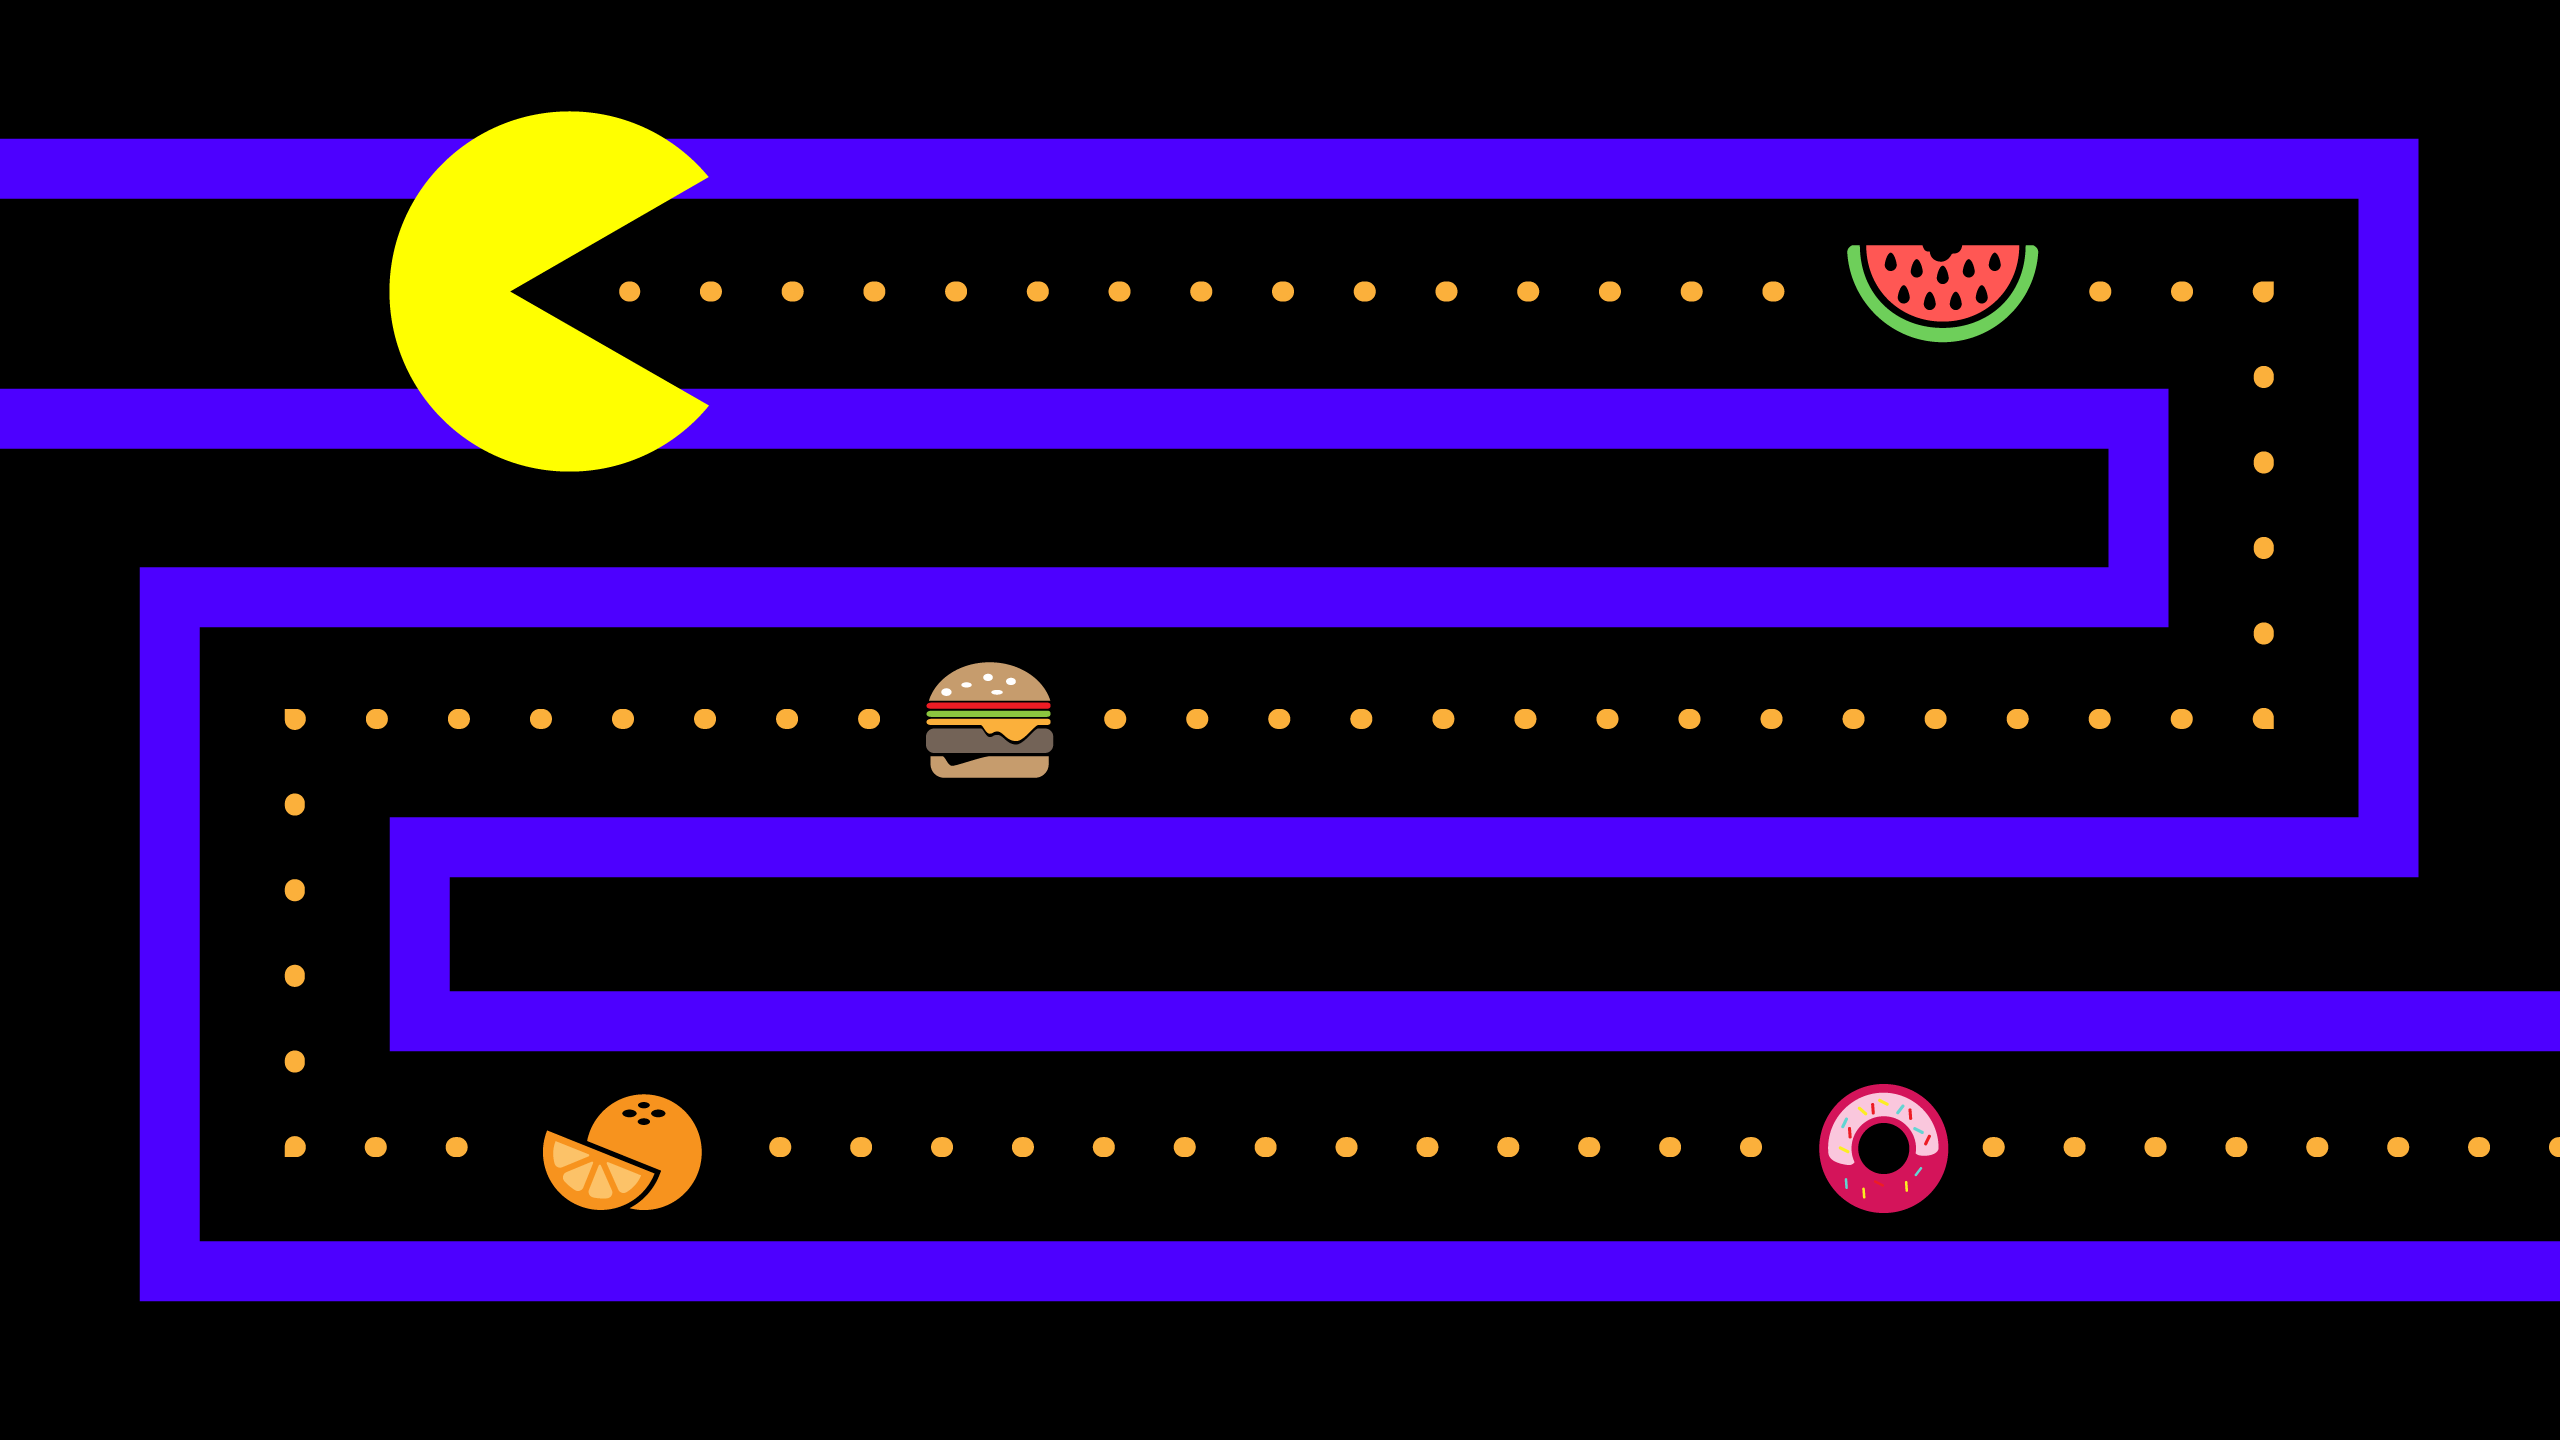 The relationship between data quality and machine learning conveyed with Pac-man and food images